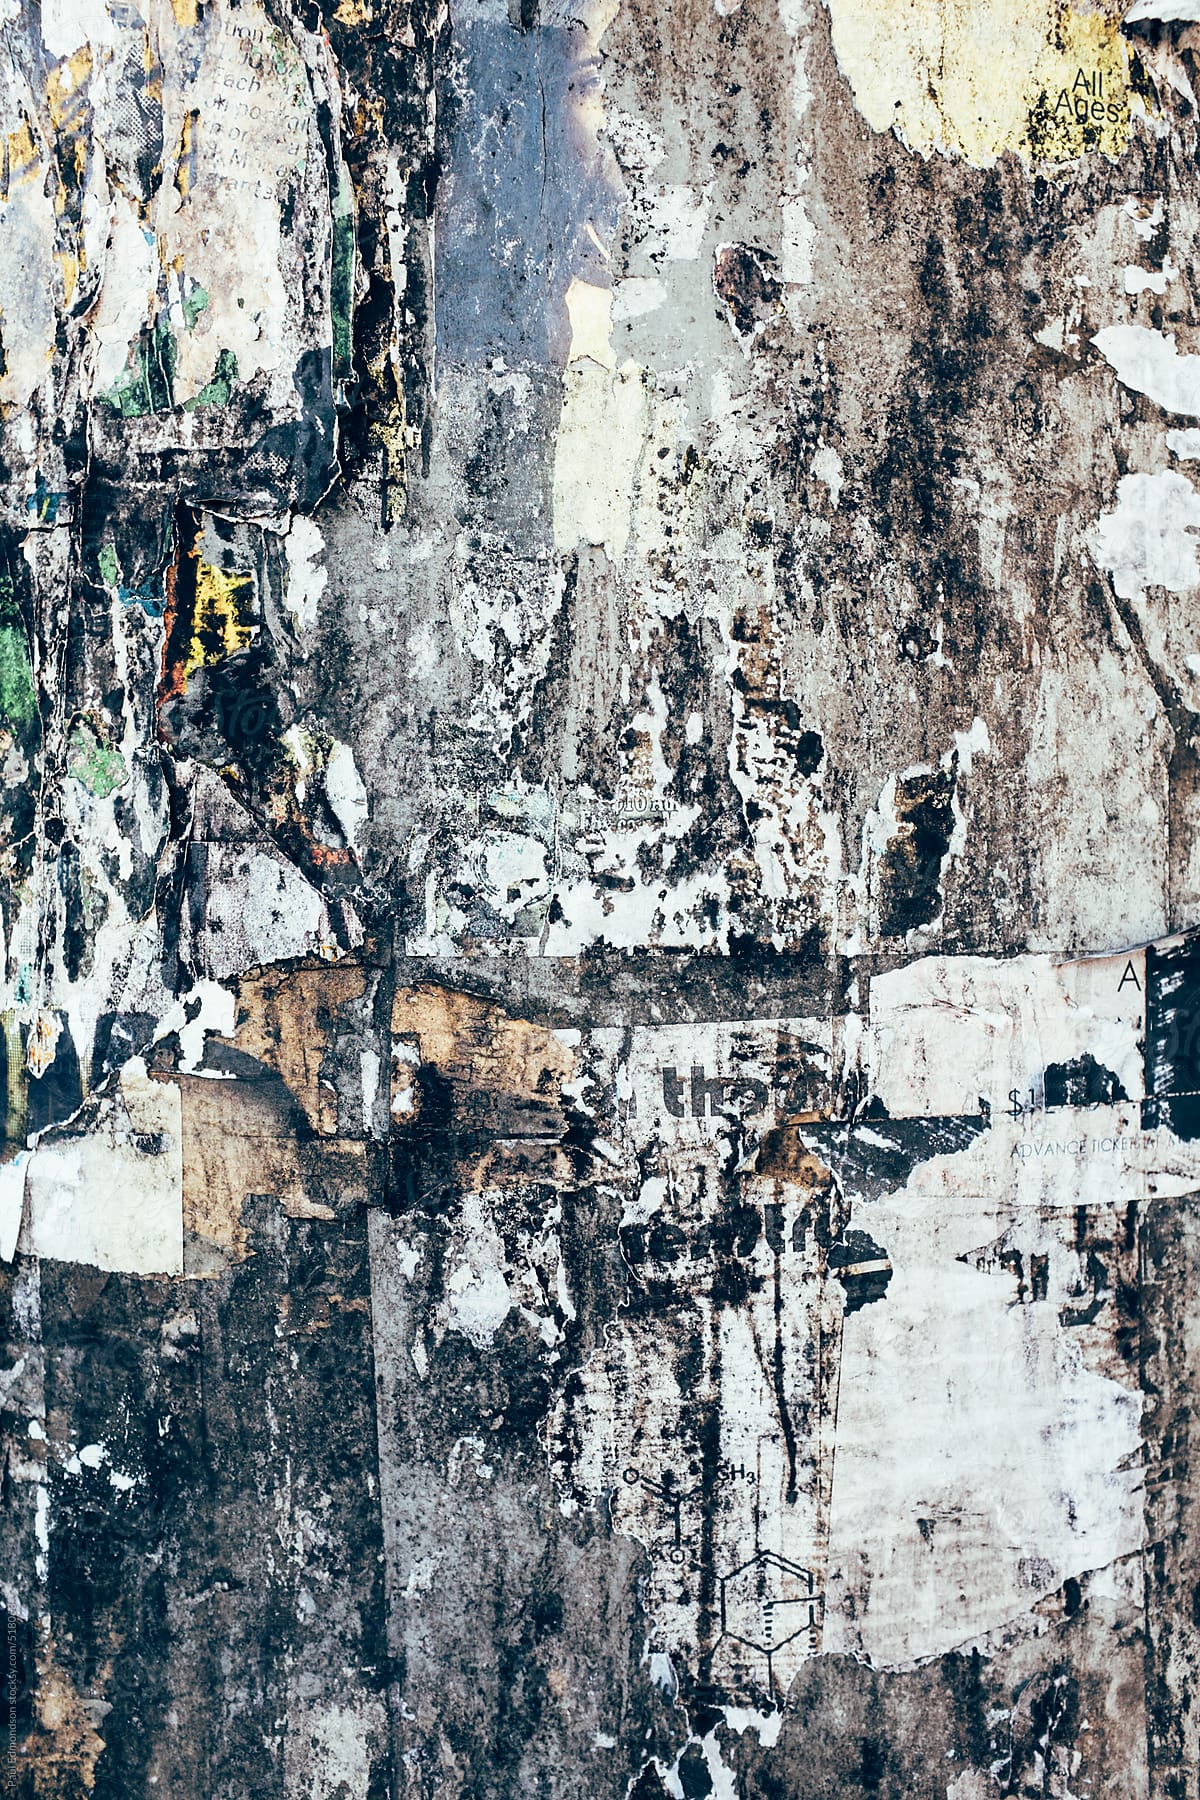 Close up peeling and decaying posters on building wall